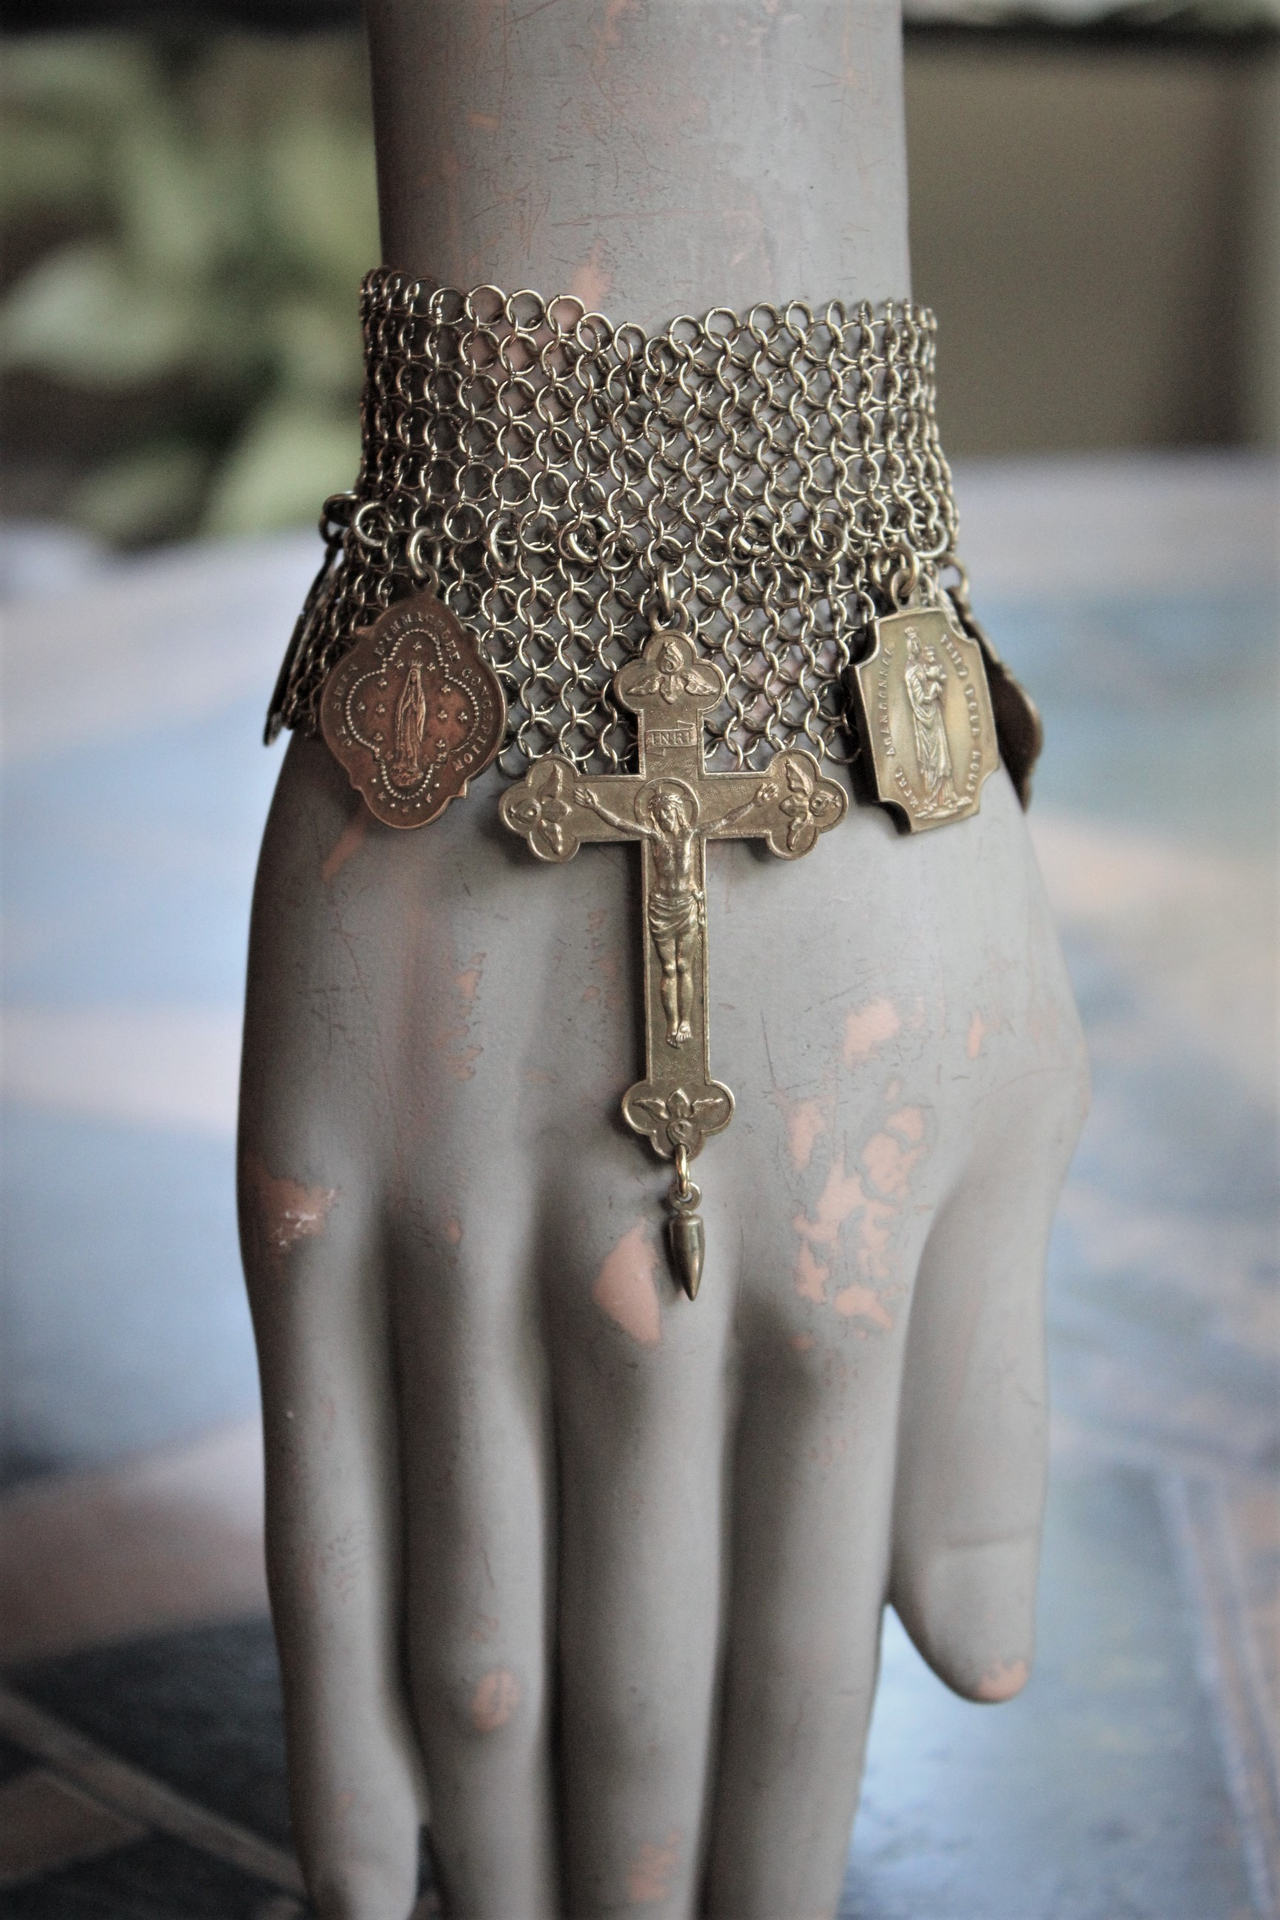 I will be Faithful Bracelet with Unique Mesh Chain, Rare Antique Gilt Cross, Antique French Medals, Antique Rolled Gold Engraved Toggle